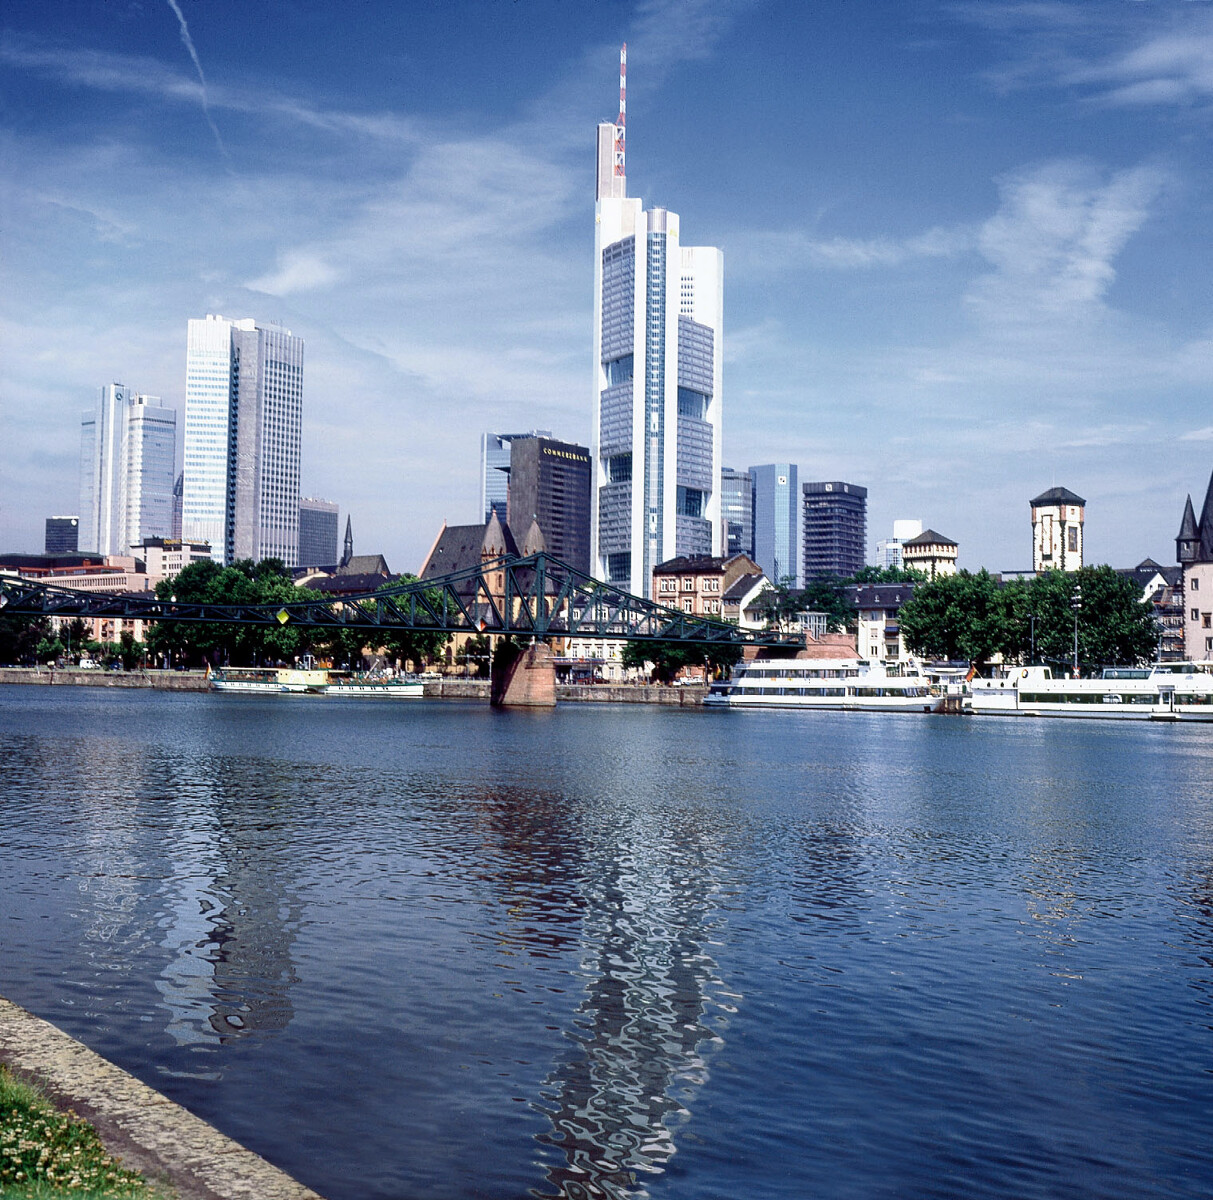 Skyline of a city located at a river bank